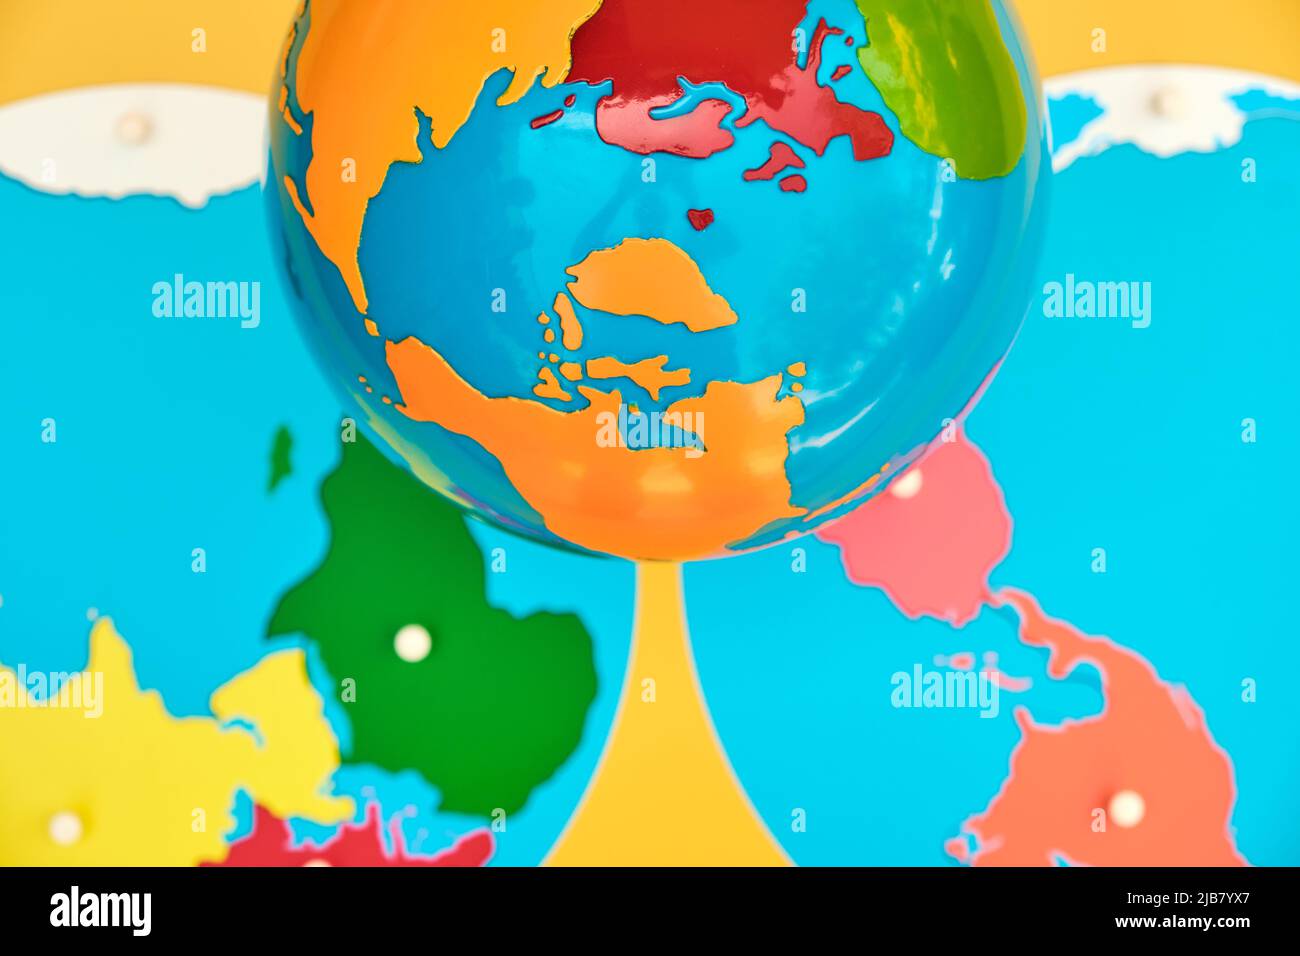 A brightly colored wooden map and globe used in a montessori school for education. Stock Photo